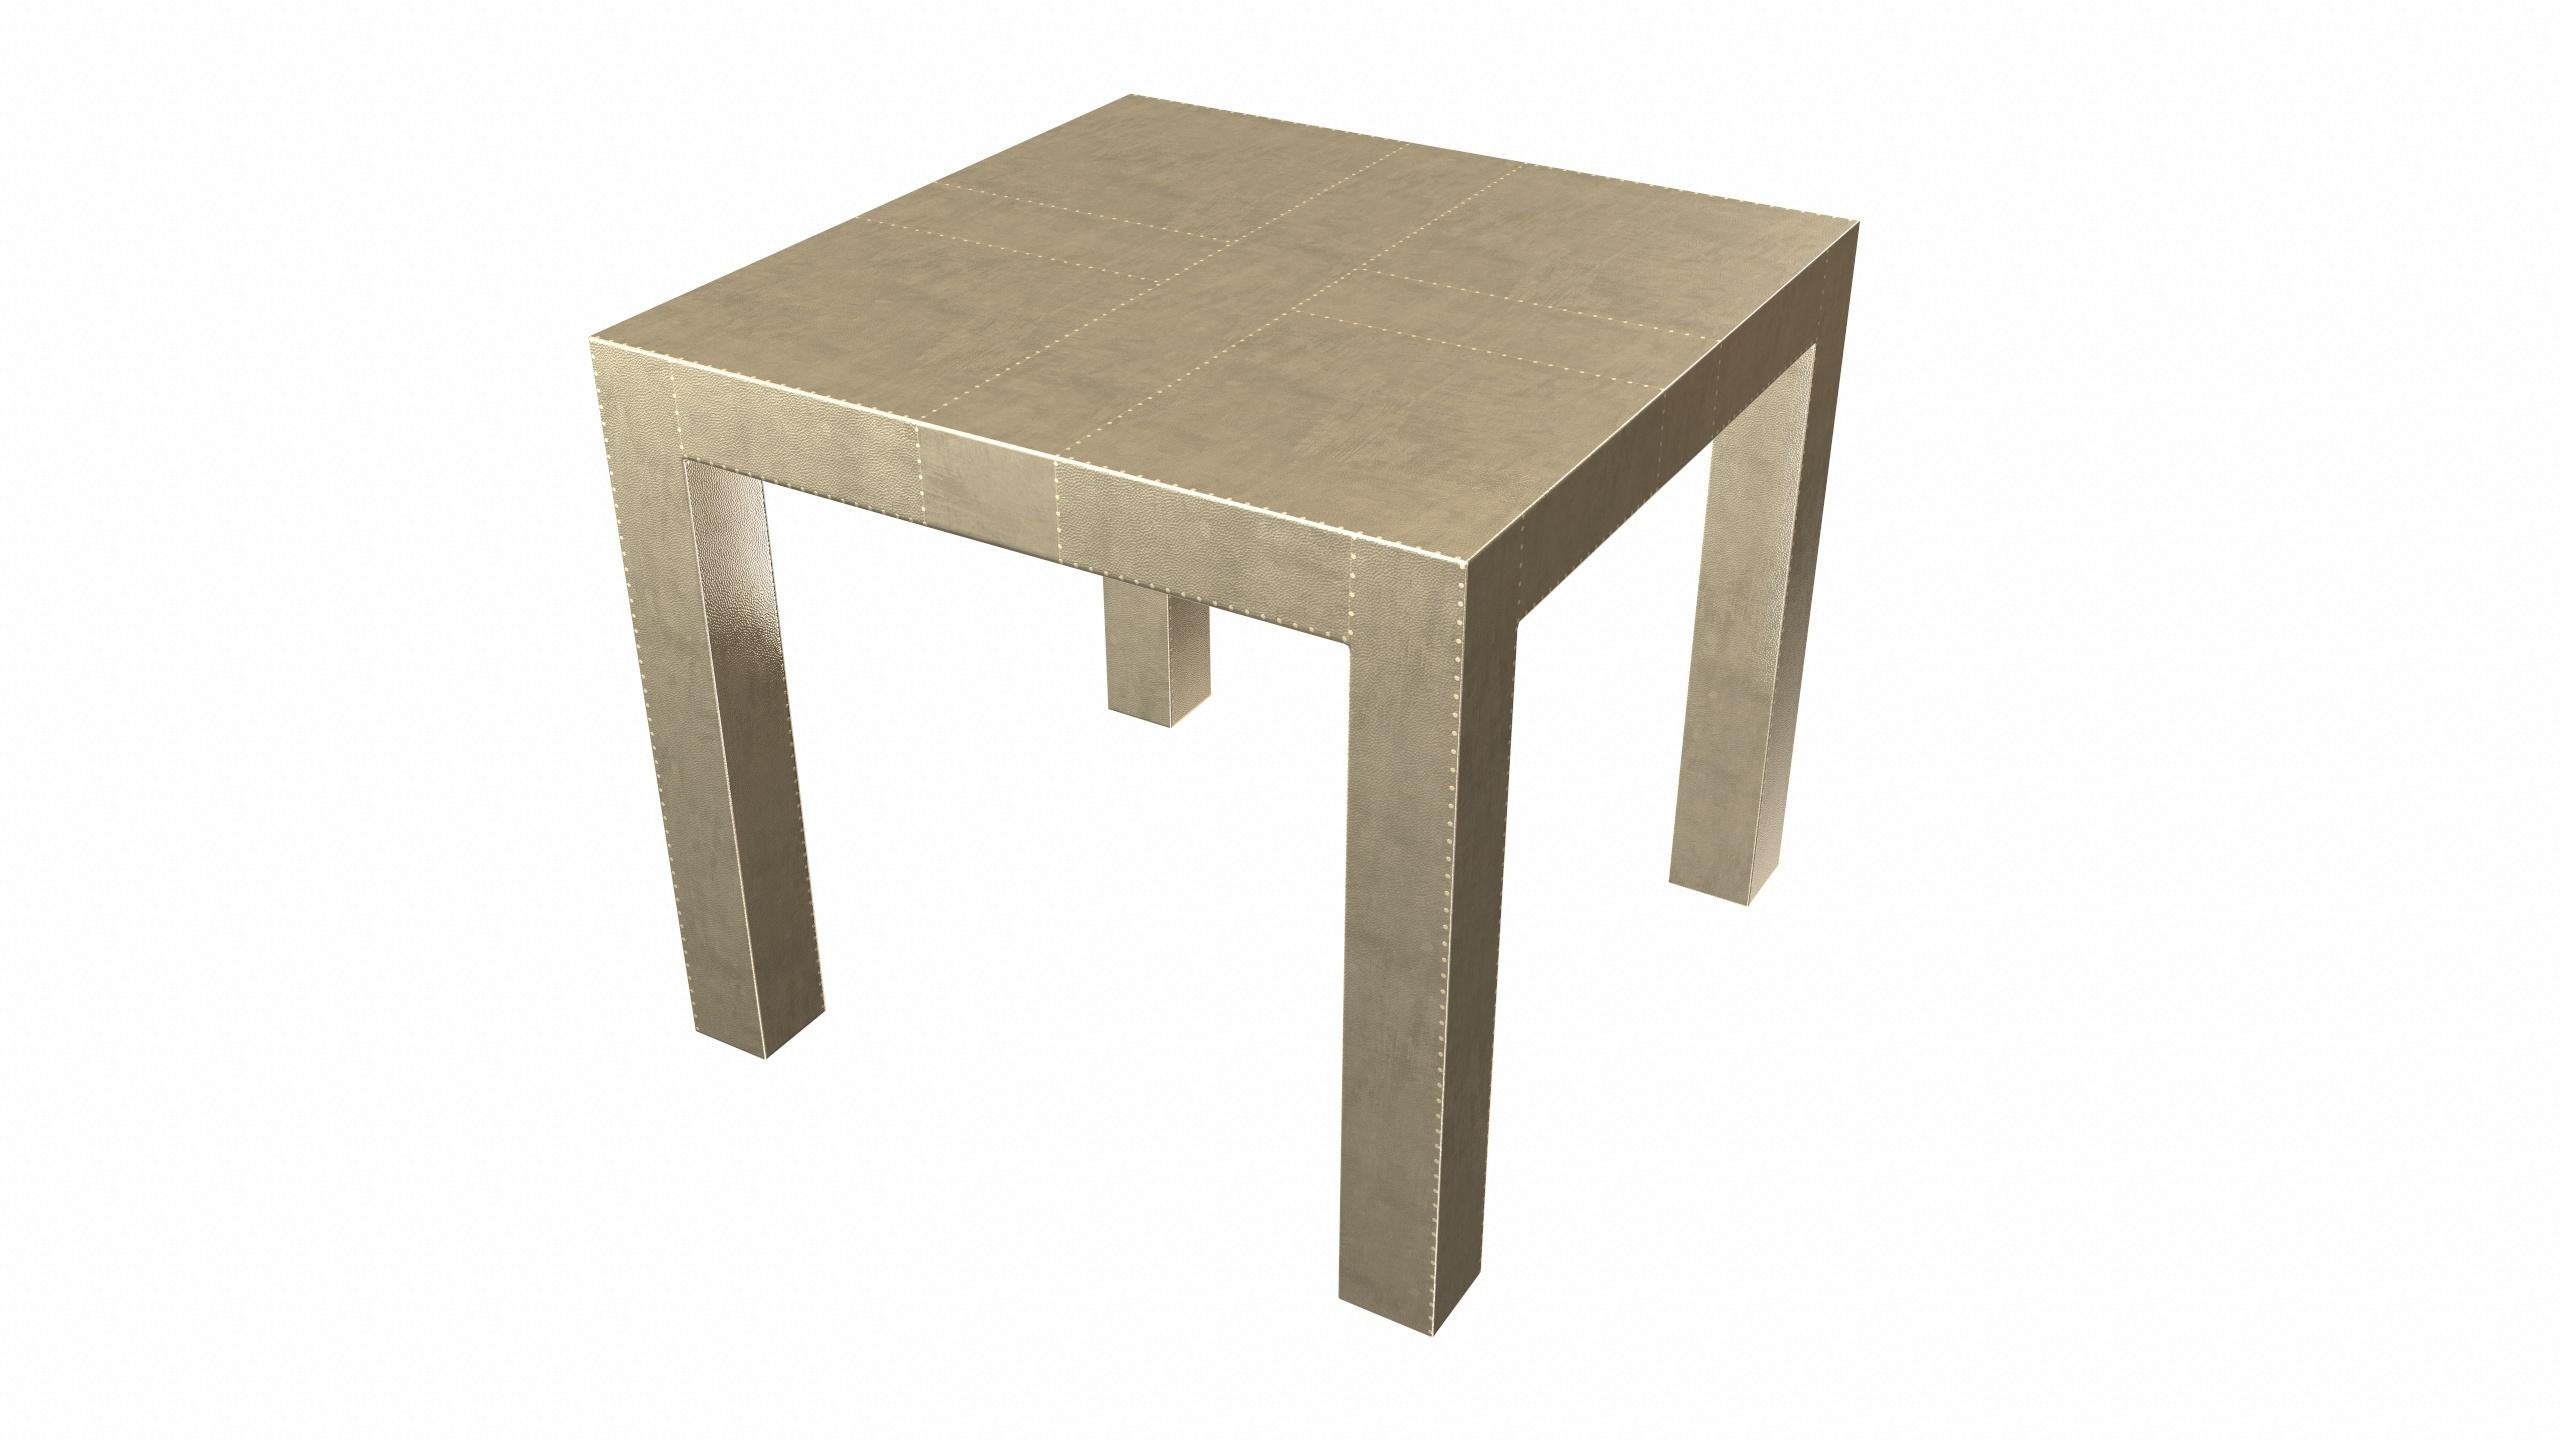 Louise Art Deco Lowboys Square Drink Table Mid. Gehämmertes Messing von Alison Spear (Metall) im Angebot